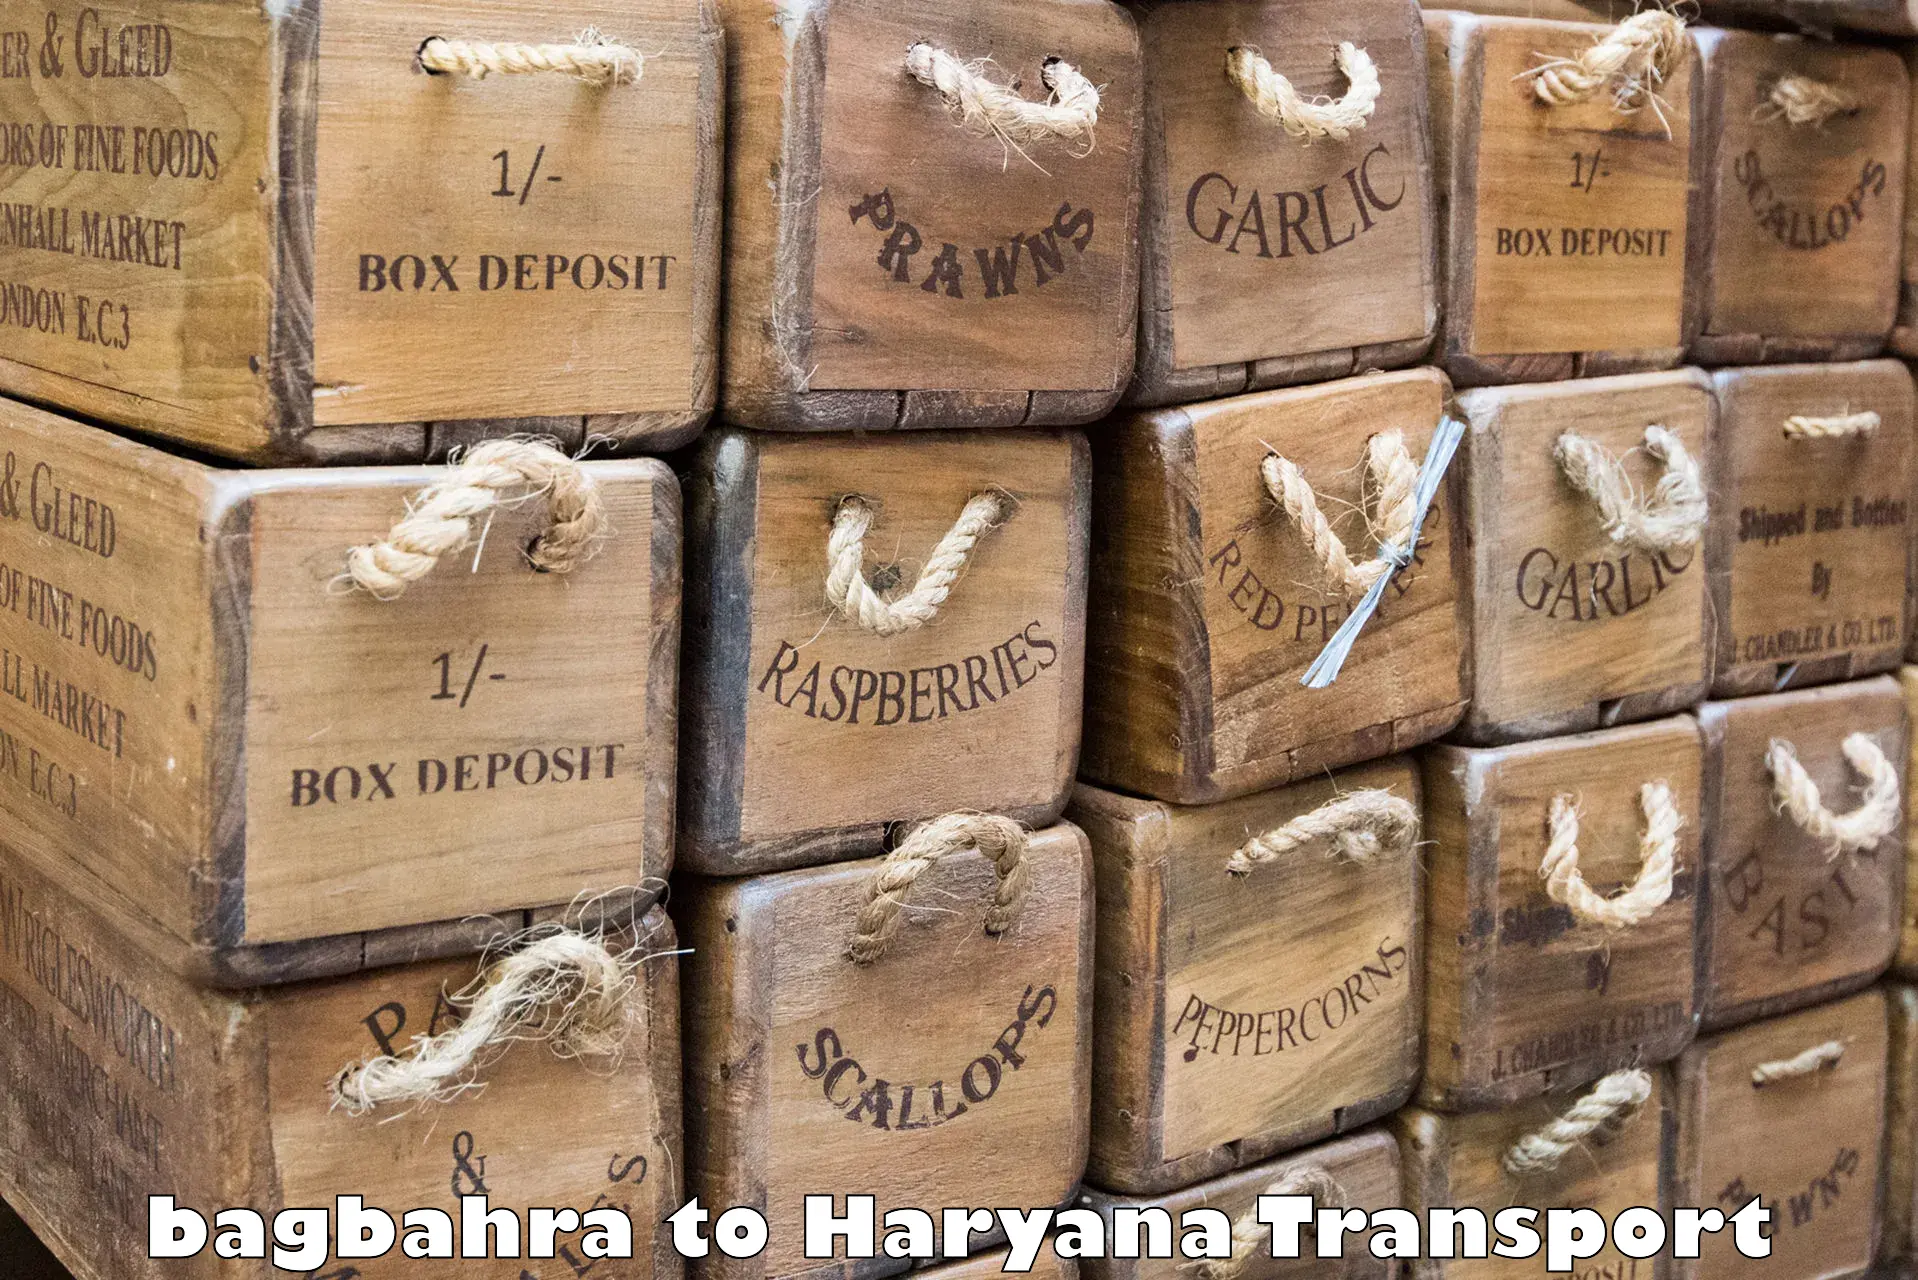 Goods delivery service bagbahra to Chaudhary Charan Singh Haryana Agricultural University Hisar